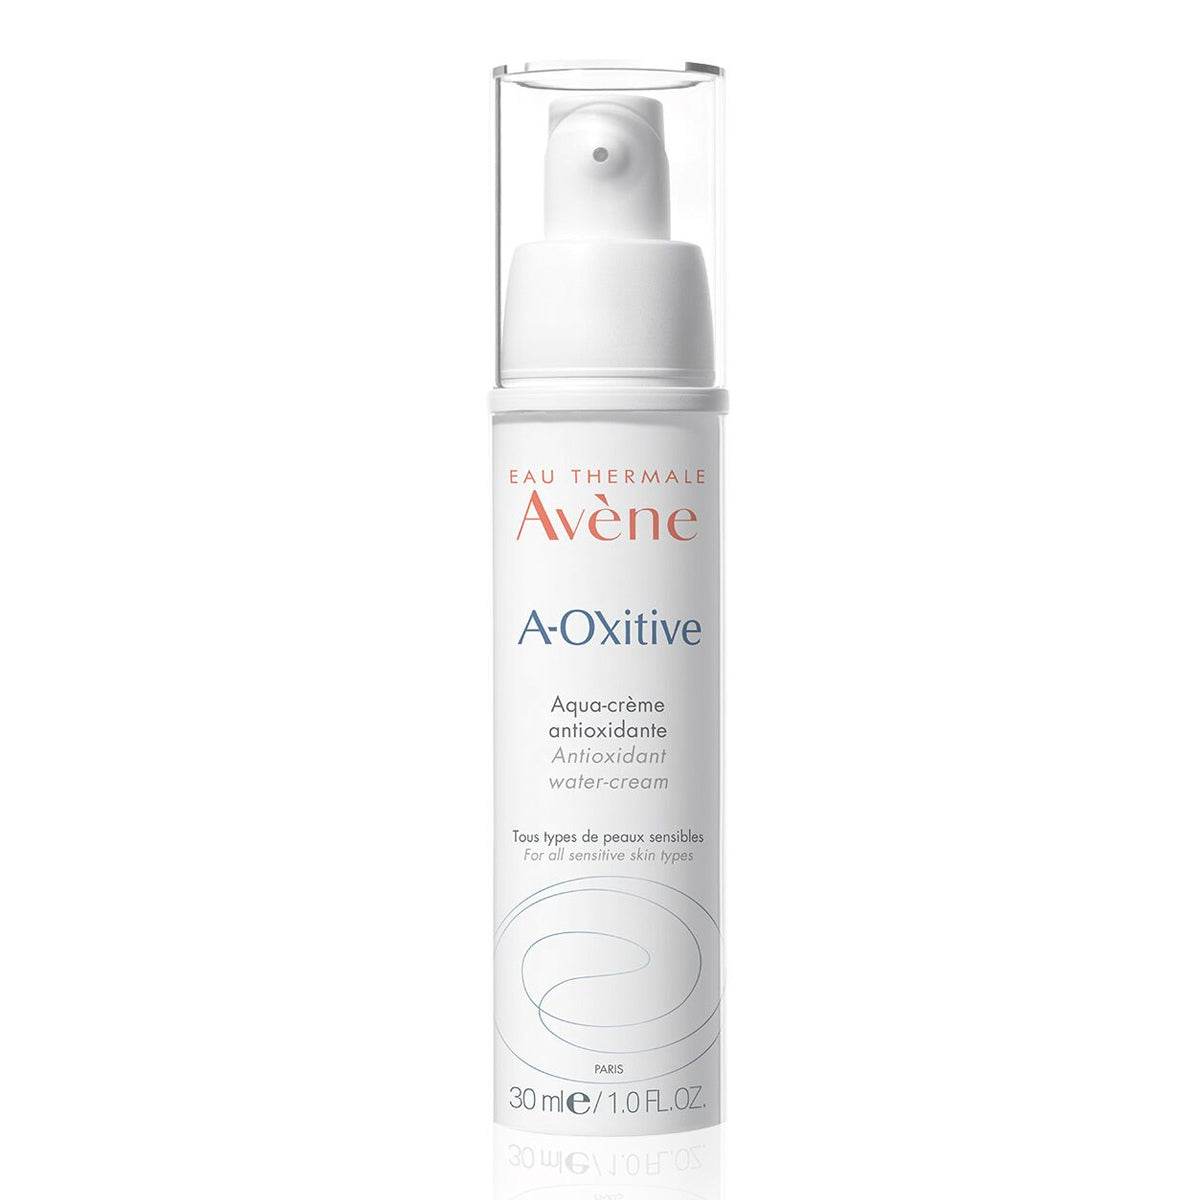 Primary image of A-OXitive Antioxidant Water-Cream